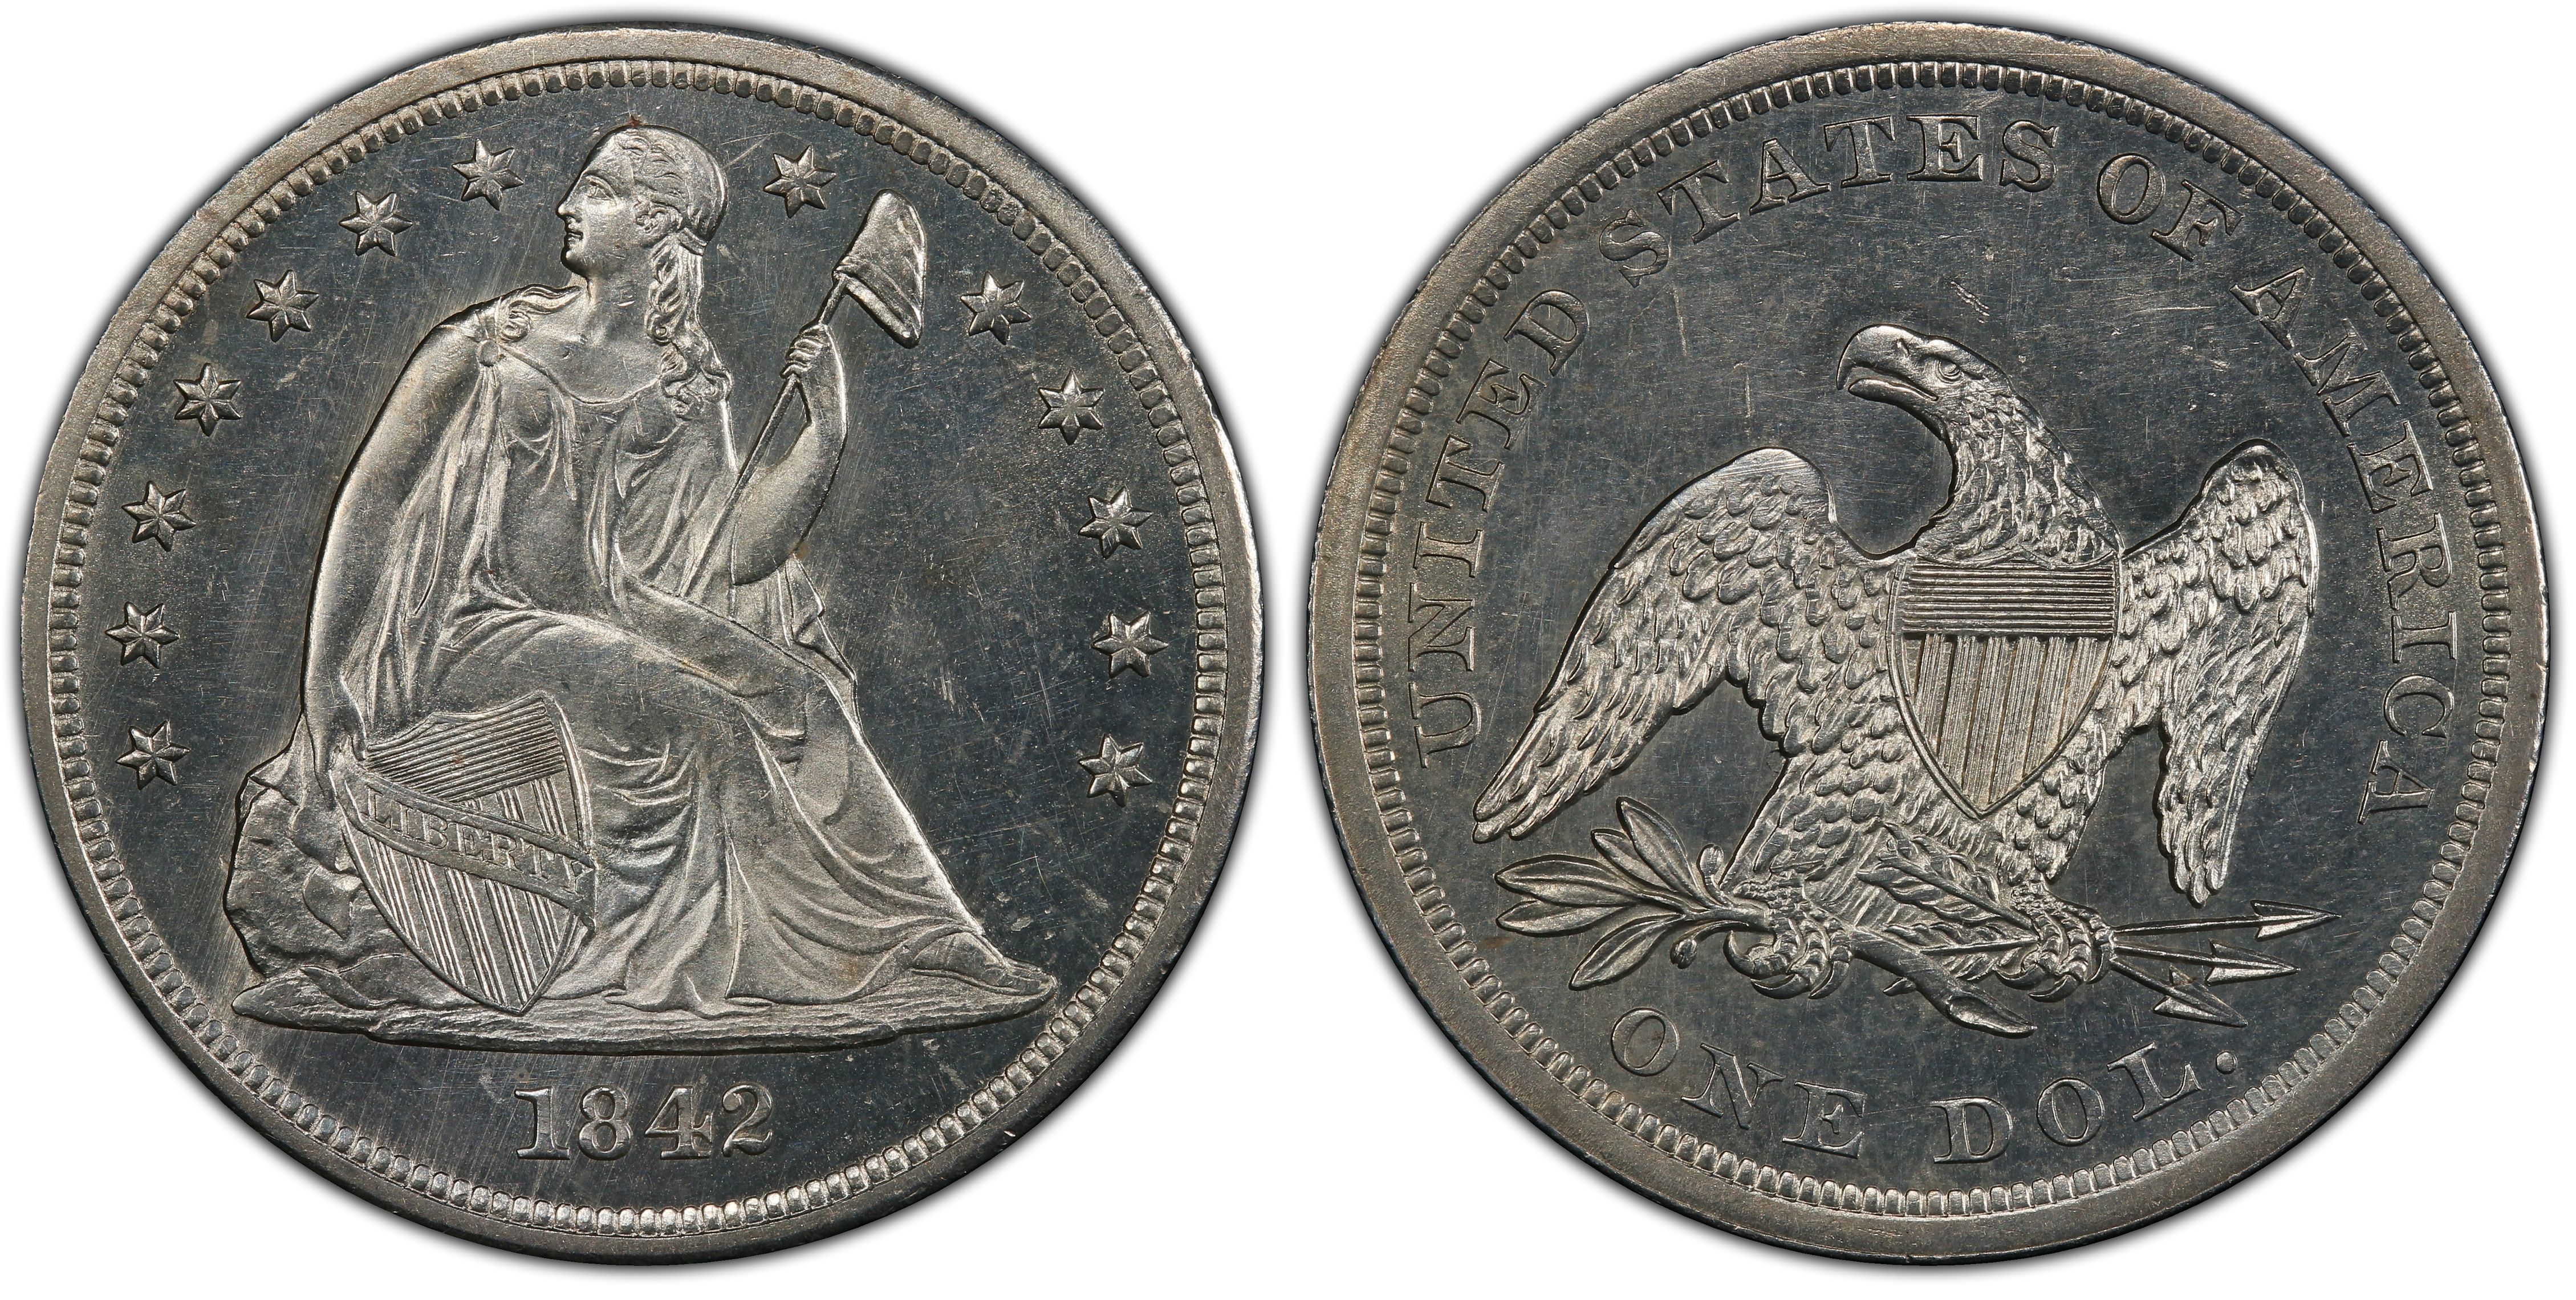 1842 $1 (Regular Strike) Liberty Seated Dollar - PCGS CoinFacts